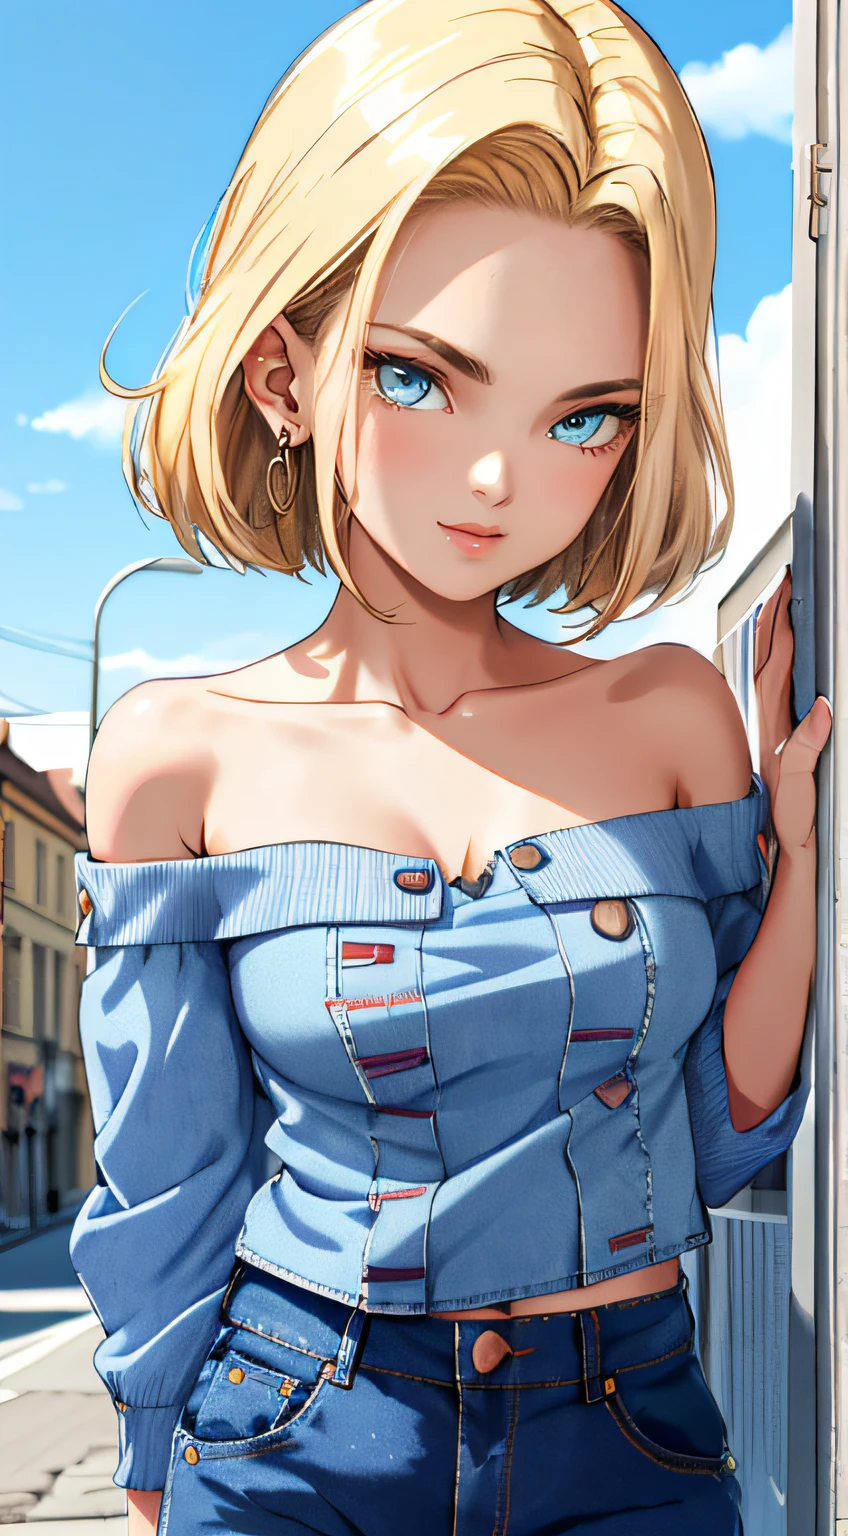 tmasterpiece， Best quality at best， ultra - detailed， absurderes， Portrait beautiful Android18DB， solo， 耳Nipple Ring， (Bikini:1.5)，underdressing，jewely， (Off-the-shoulder attire:1.5)，cleavage， upperbody closeup，ssmile， thongs， vests， ​​clouds， Skysky， daysies， exteriors，Denim super shorts，best qualtiy， tmasterpiece， intricately details， Tone-mapping， Sharp focus， ultra - detailed， Artstati is the trend，lips, perfect face, blush, lover